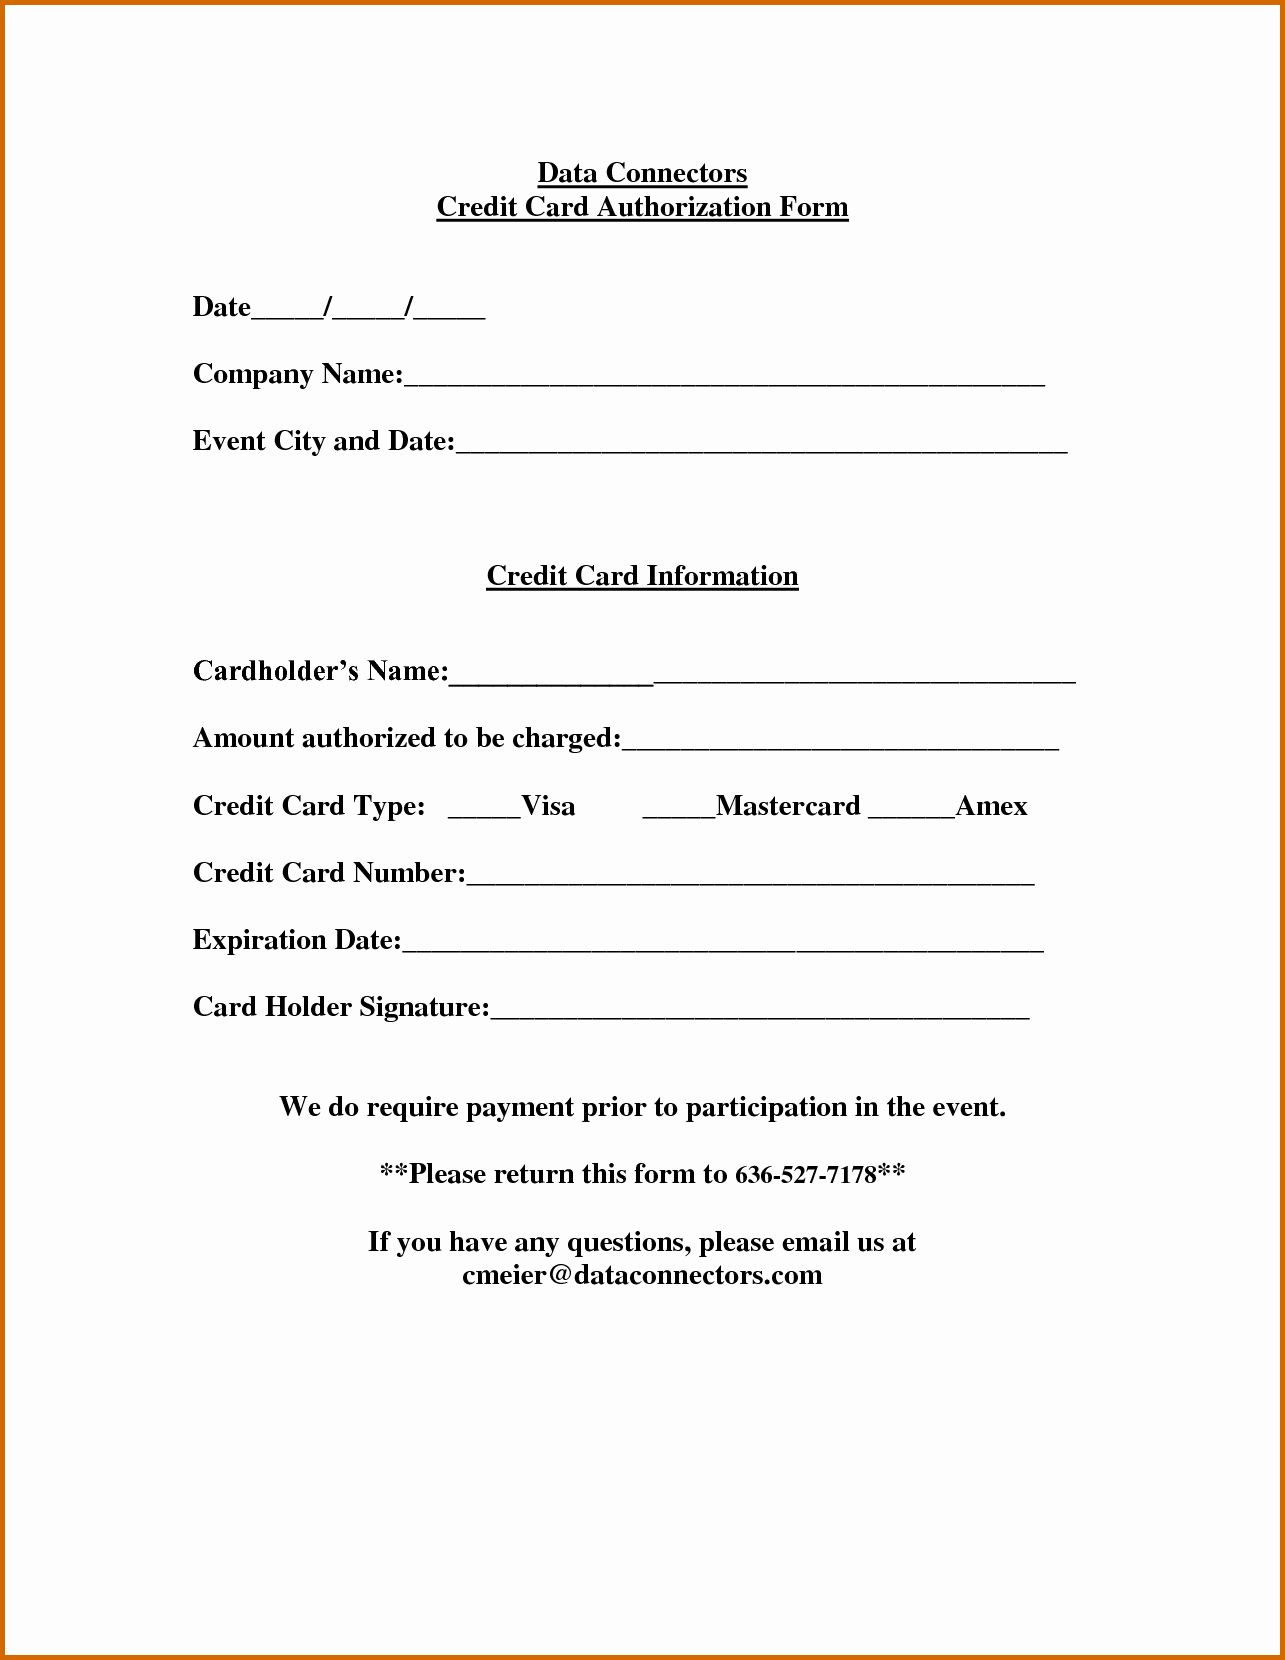 Credit Card Authorization Form Template Canada 2021